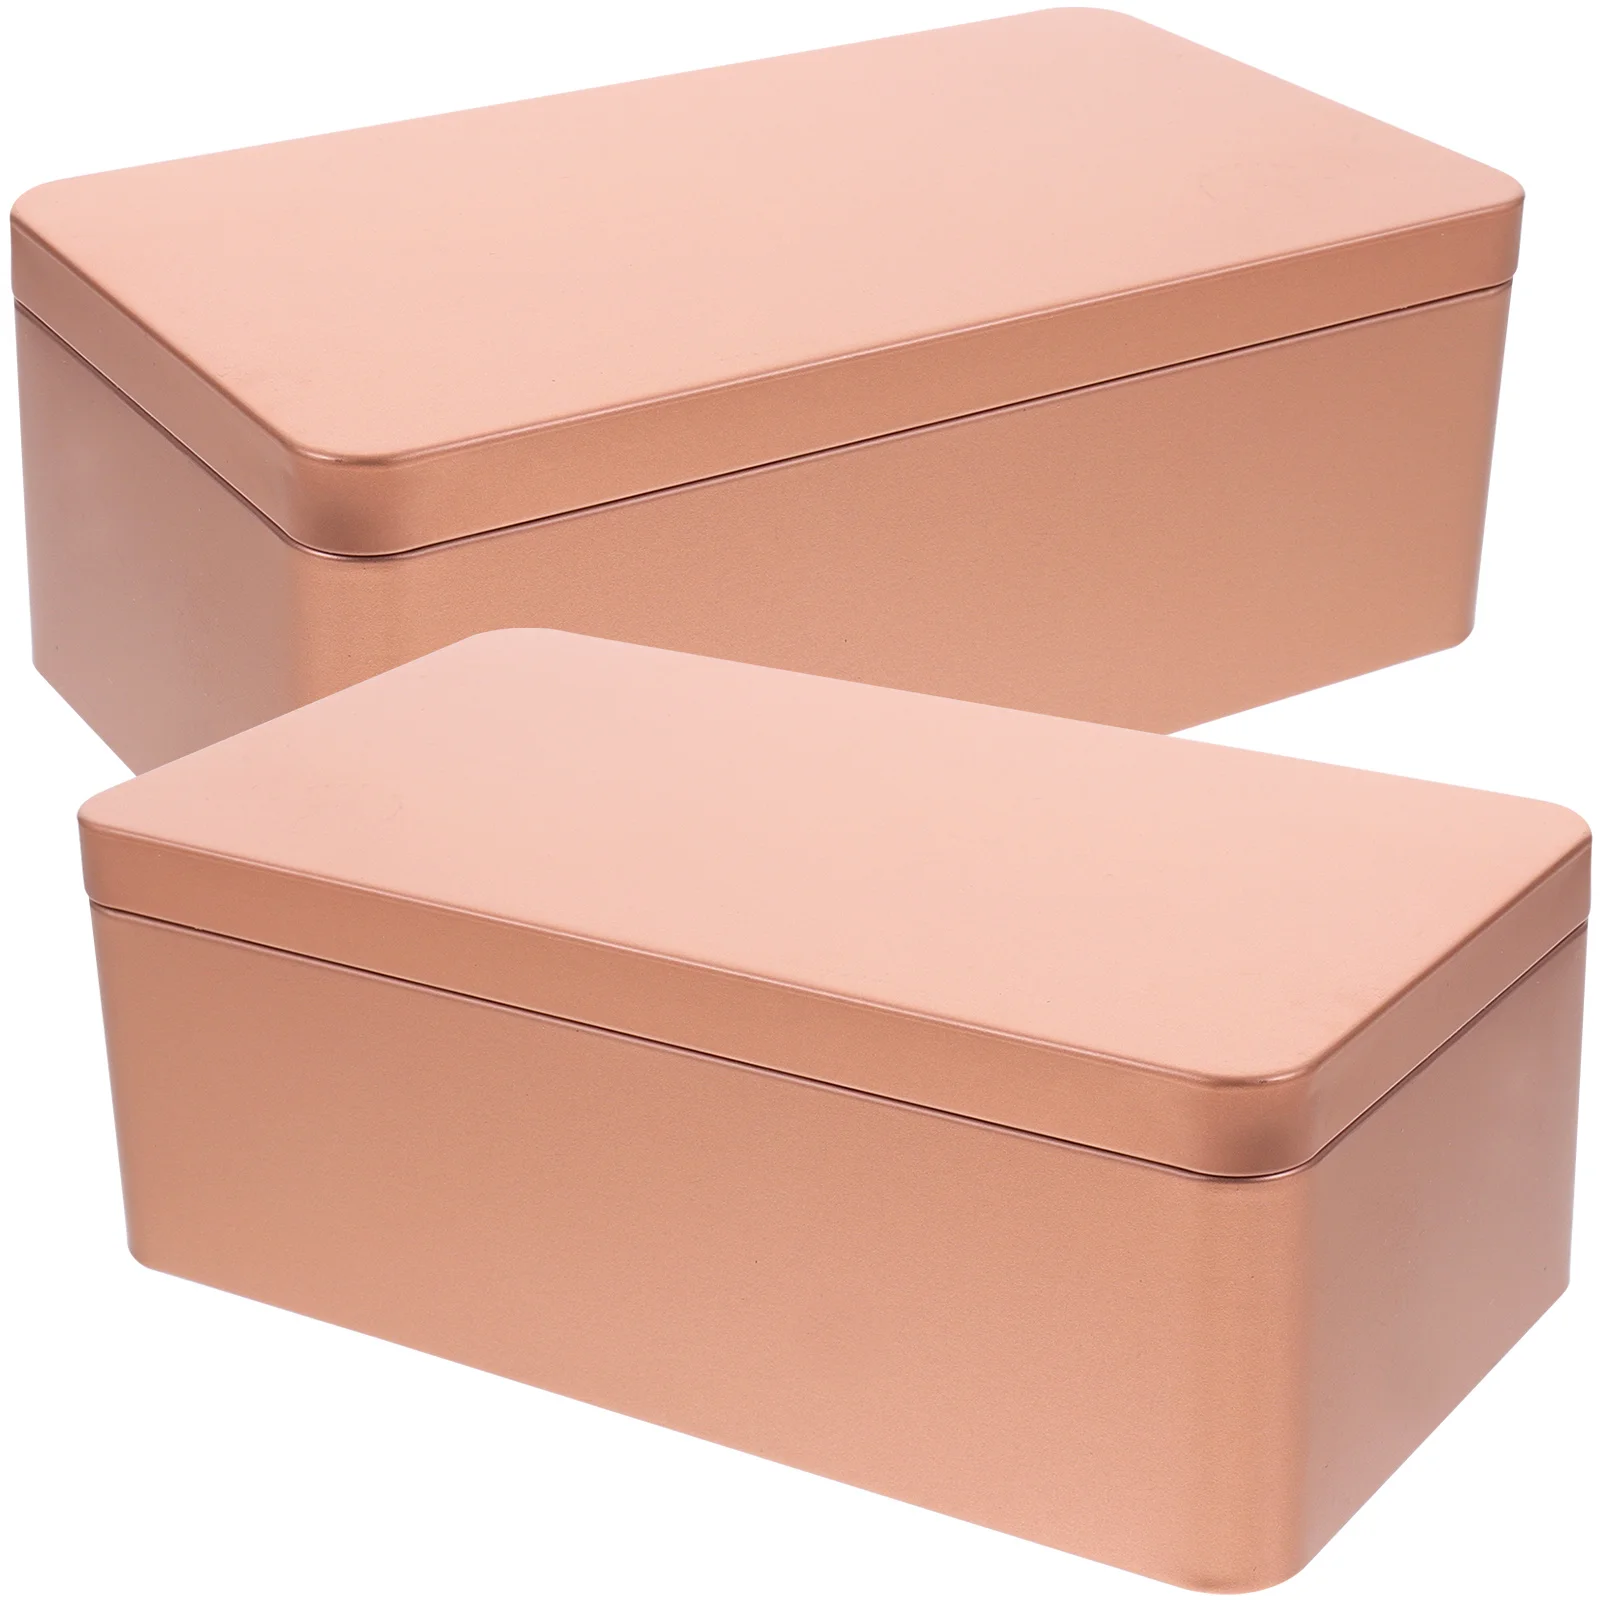 

2 Pcs Tinplate Gift Box Tea Case Rectangular Candy Small Container Lid Packing Metal Tins Cookie Storage Cans